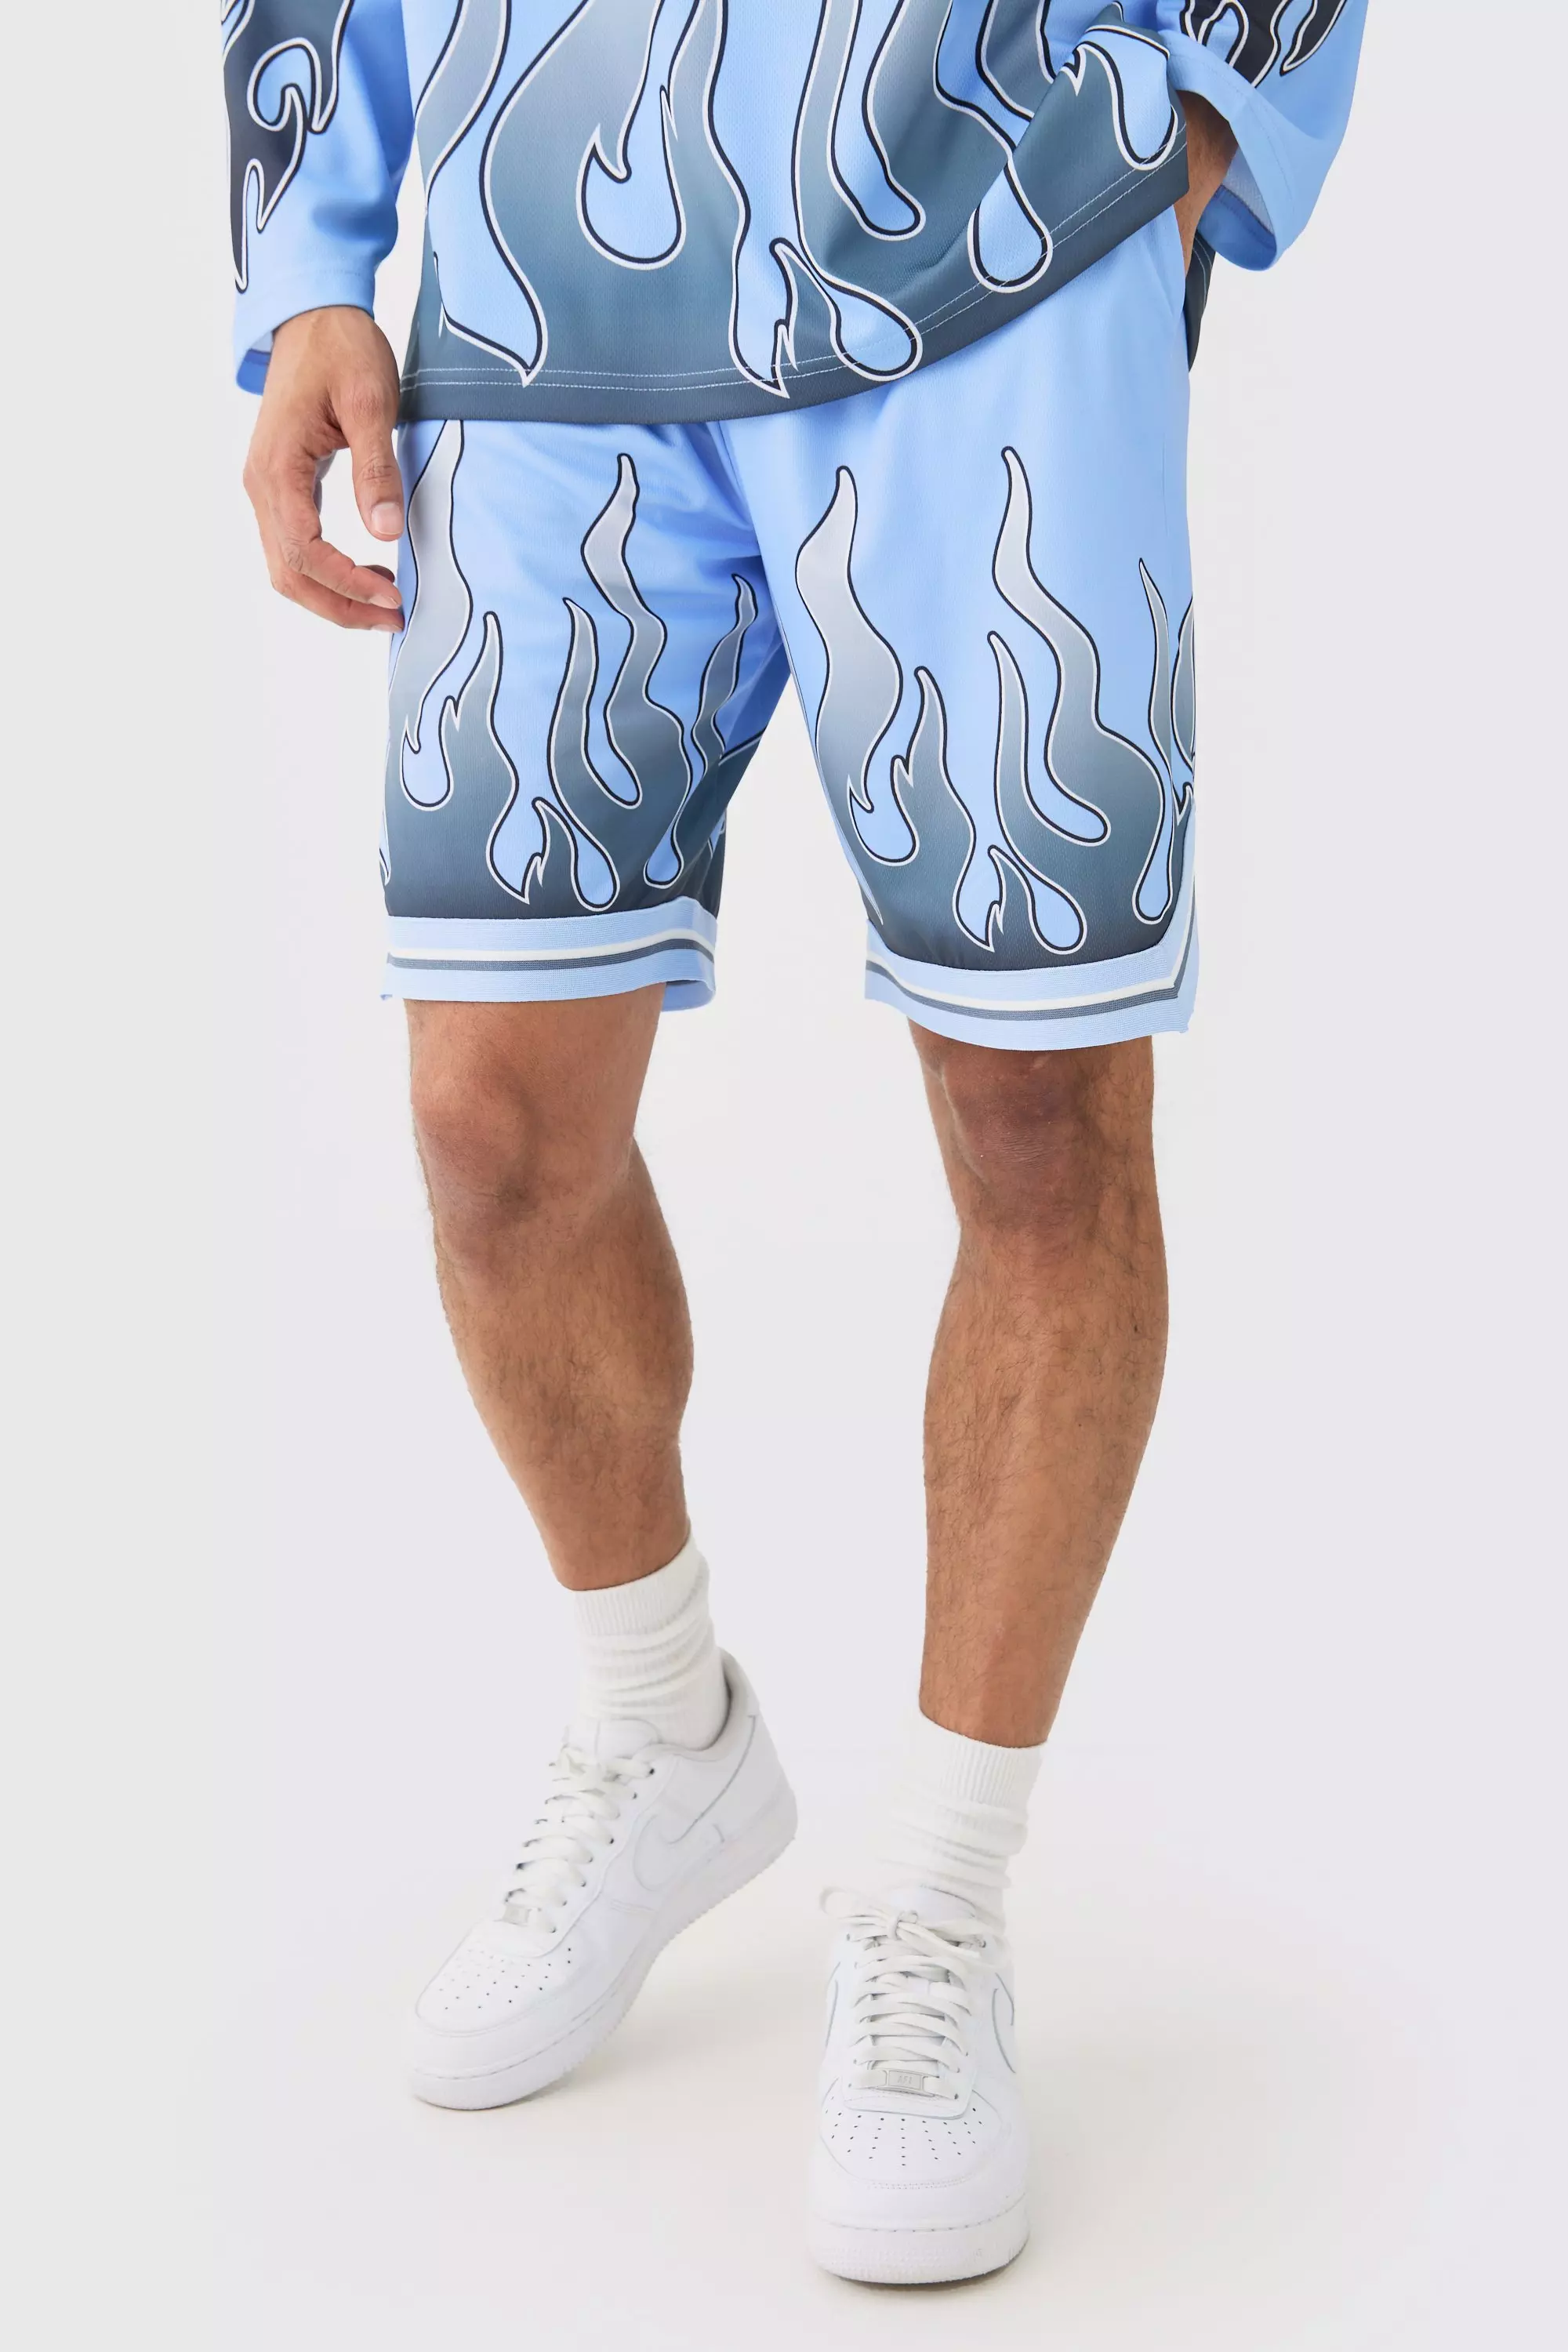 Flame Graphic Mesh Basketball Shorts Blue